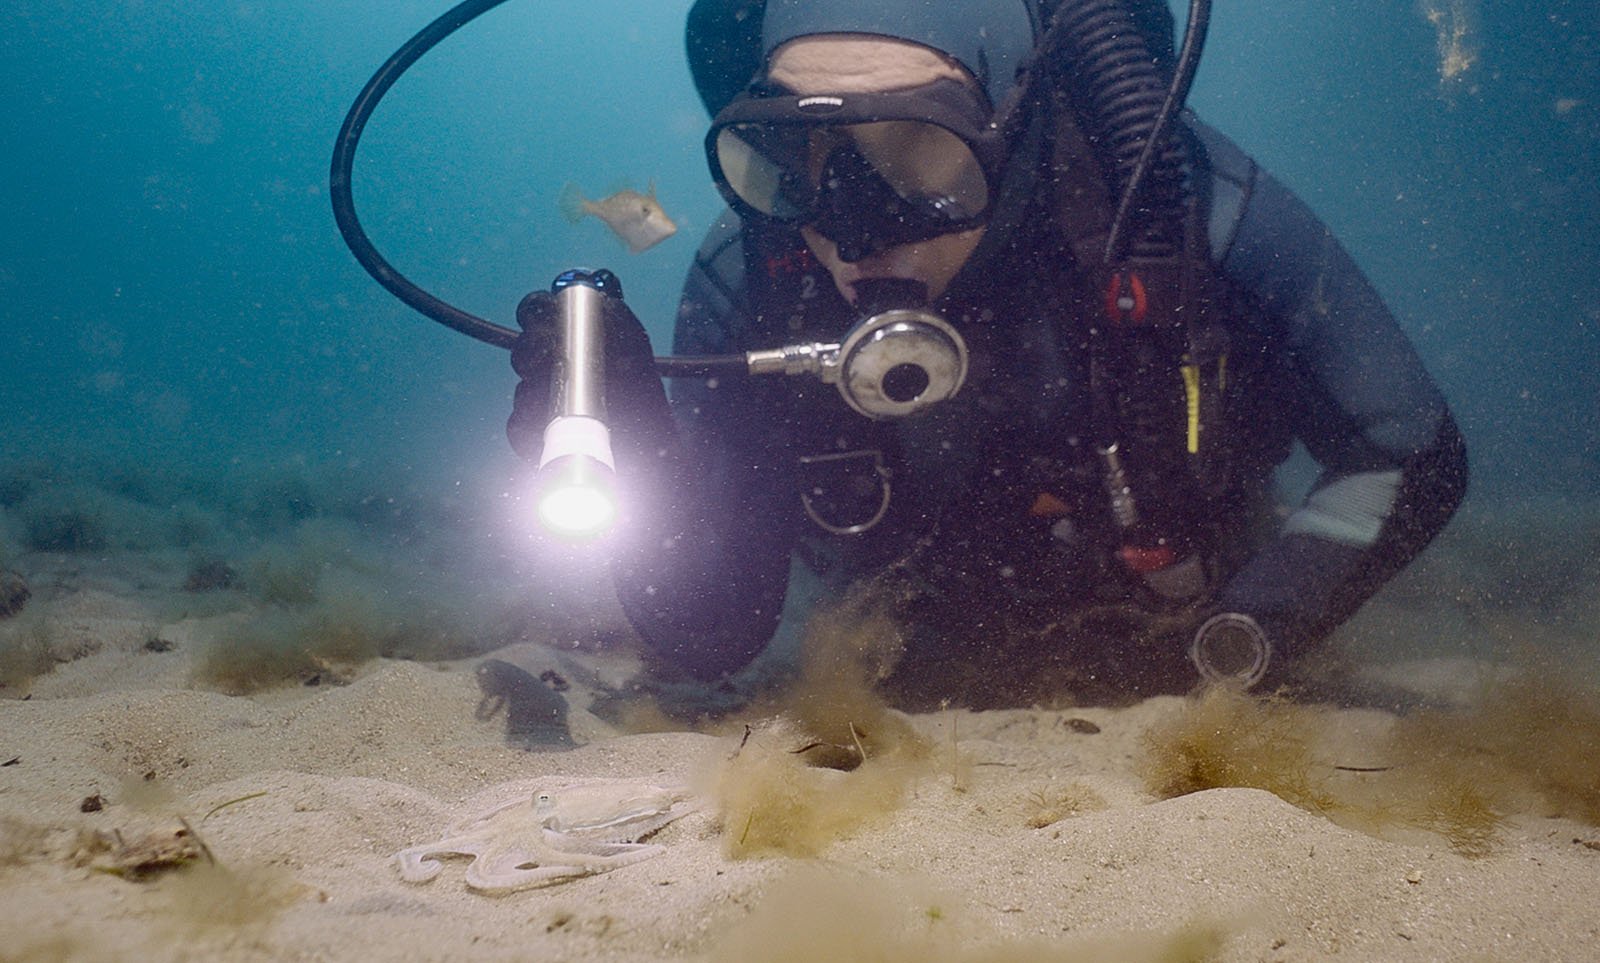 A scuba diver with a flashlight exploring the sandy ocean floor, stirring up sediment, in murky underwater visibility.